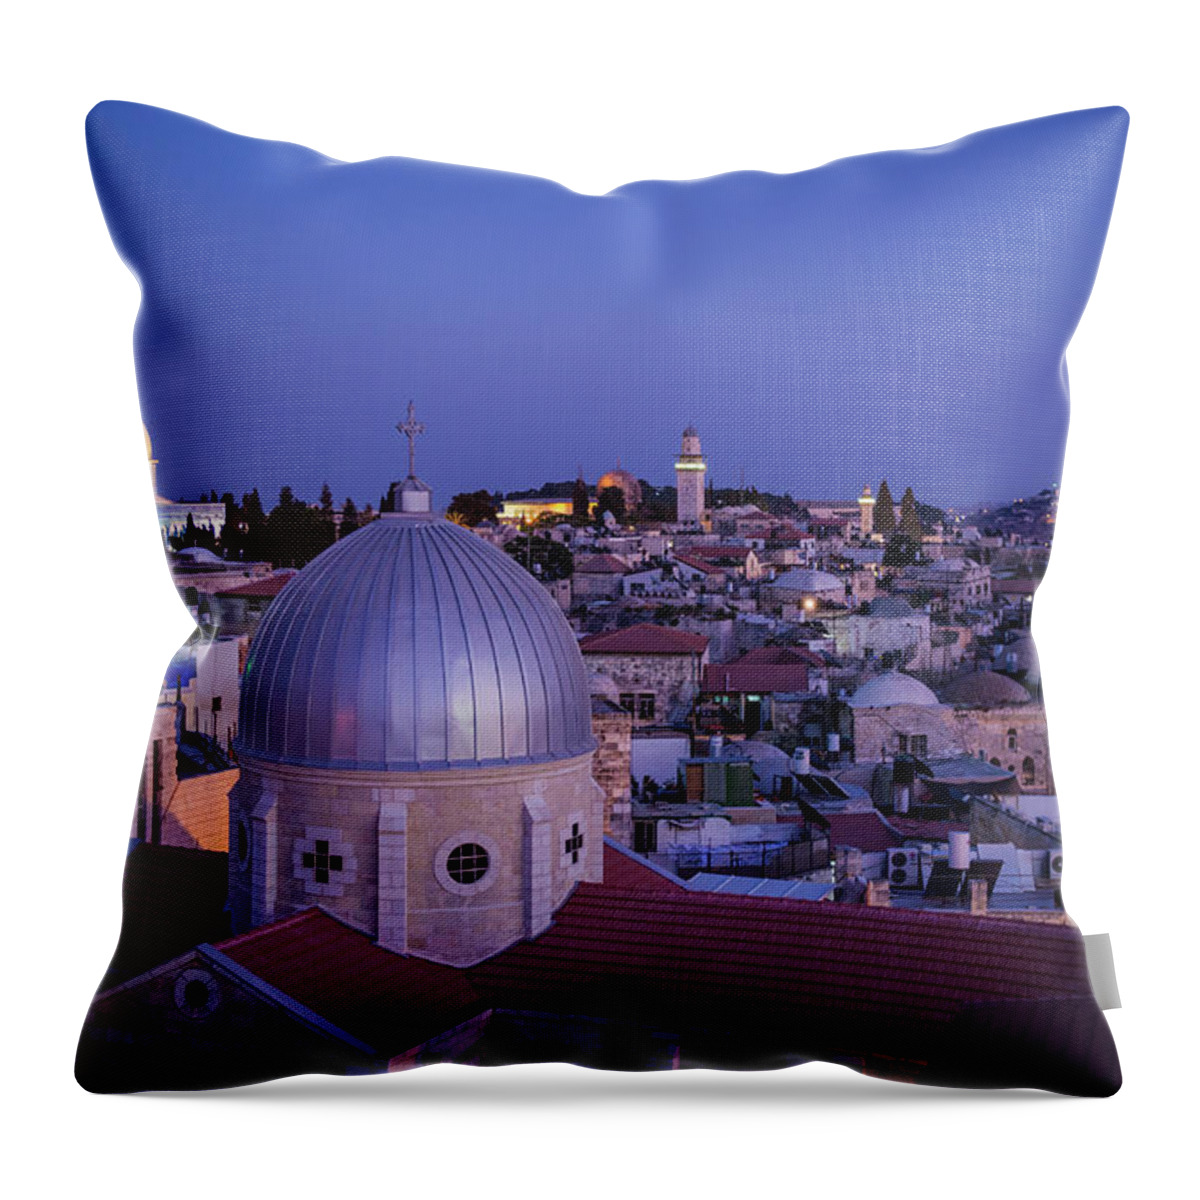 Built Structure Throw Pillow featuring the photograph Jerusalem, Israel by Photo By John Quintero